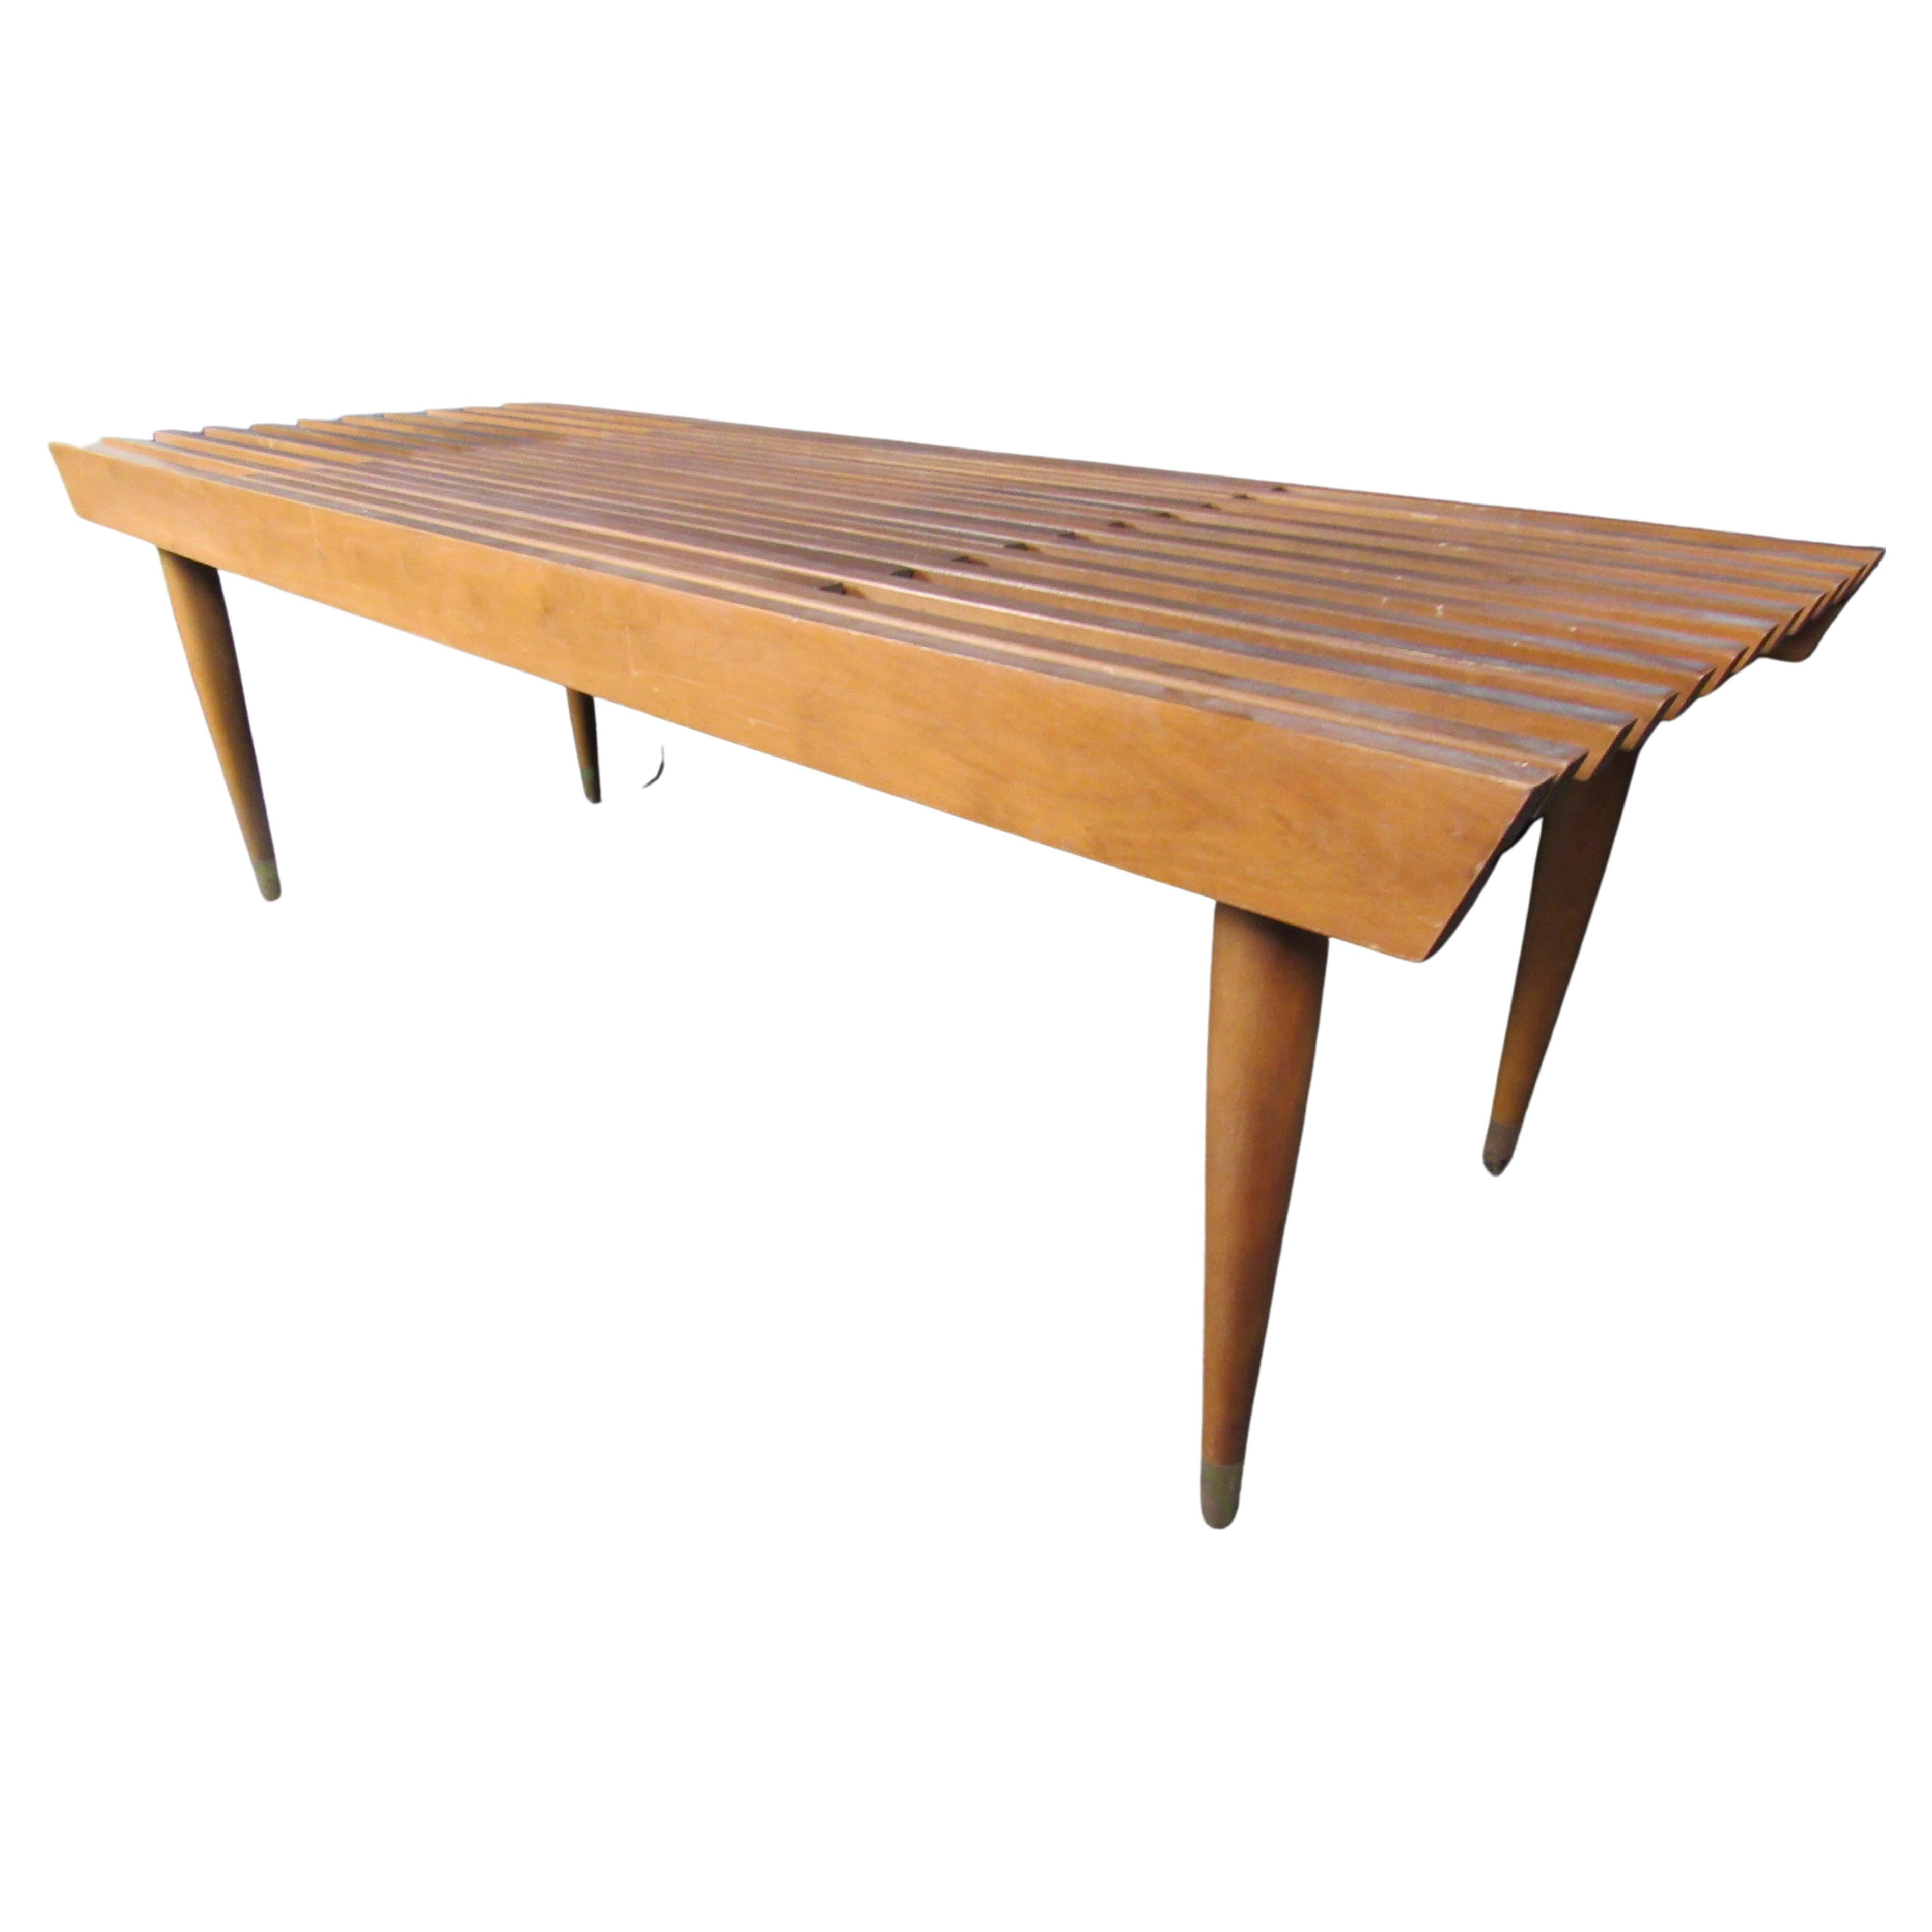 stand out in the Mid-Century Modern crowd with this unique extending walnut slat bench! While borrowing inspiration from the famed designs of George Nelson, the interlocking, sliding slats give this transformative table a life of it's own! Whether